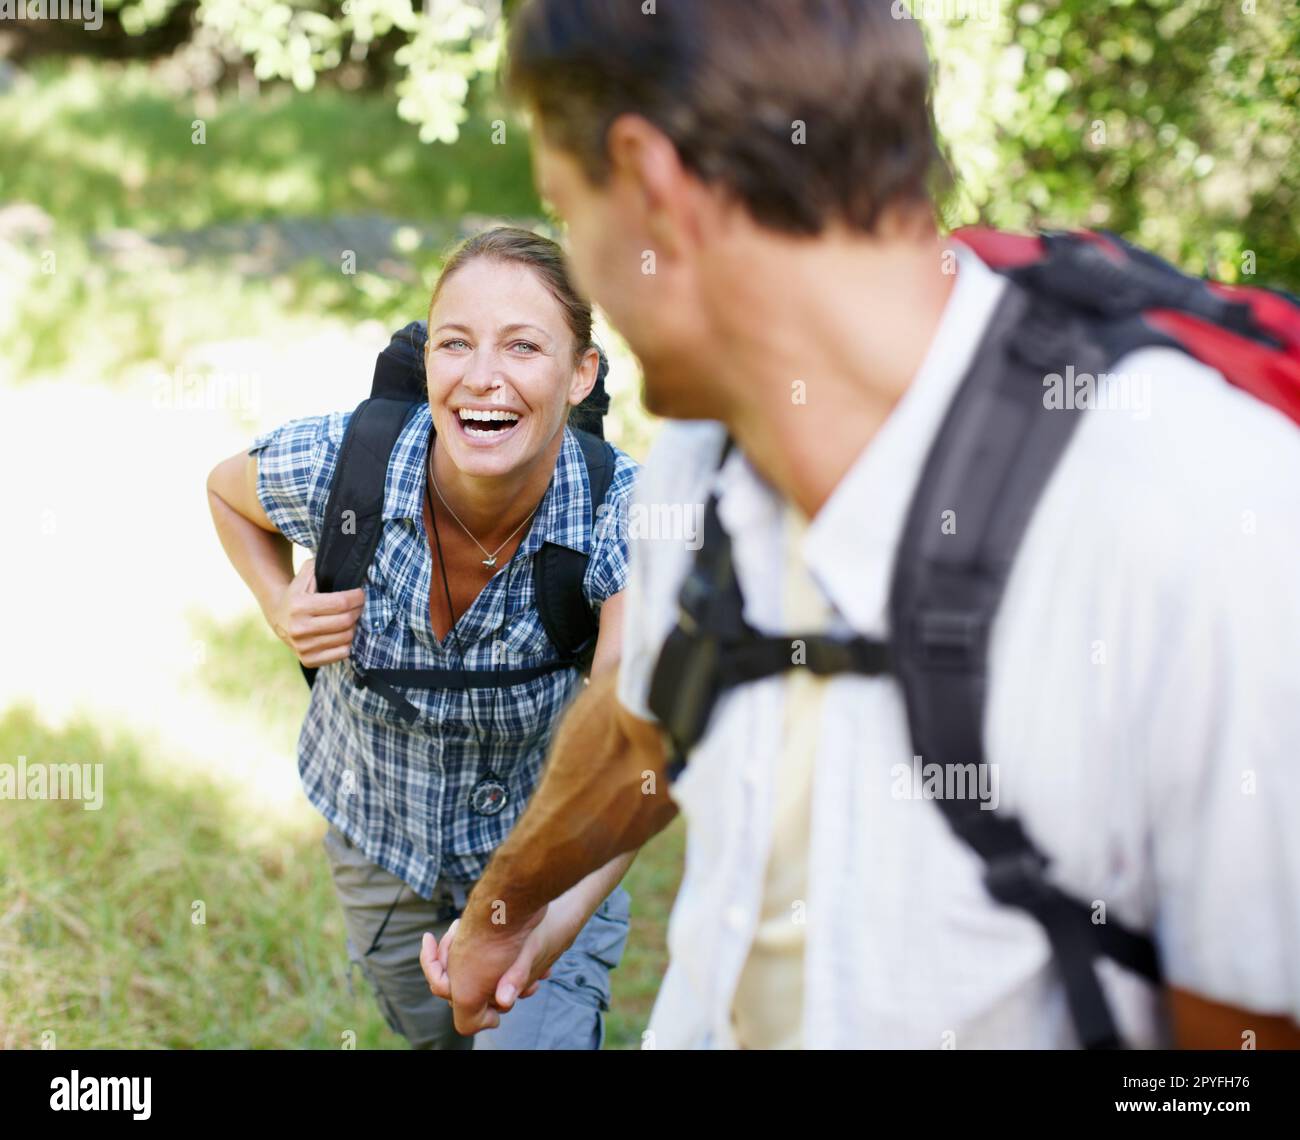 Ill go anywhere with you by my side. A young couple holding hands while hiking with their backpacks. Stock Photo